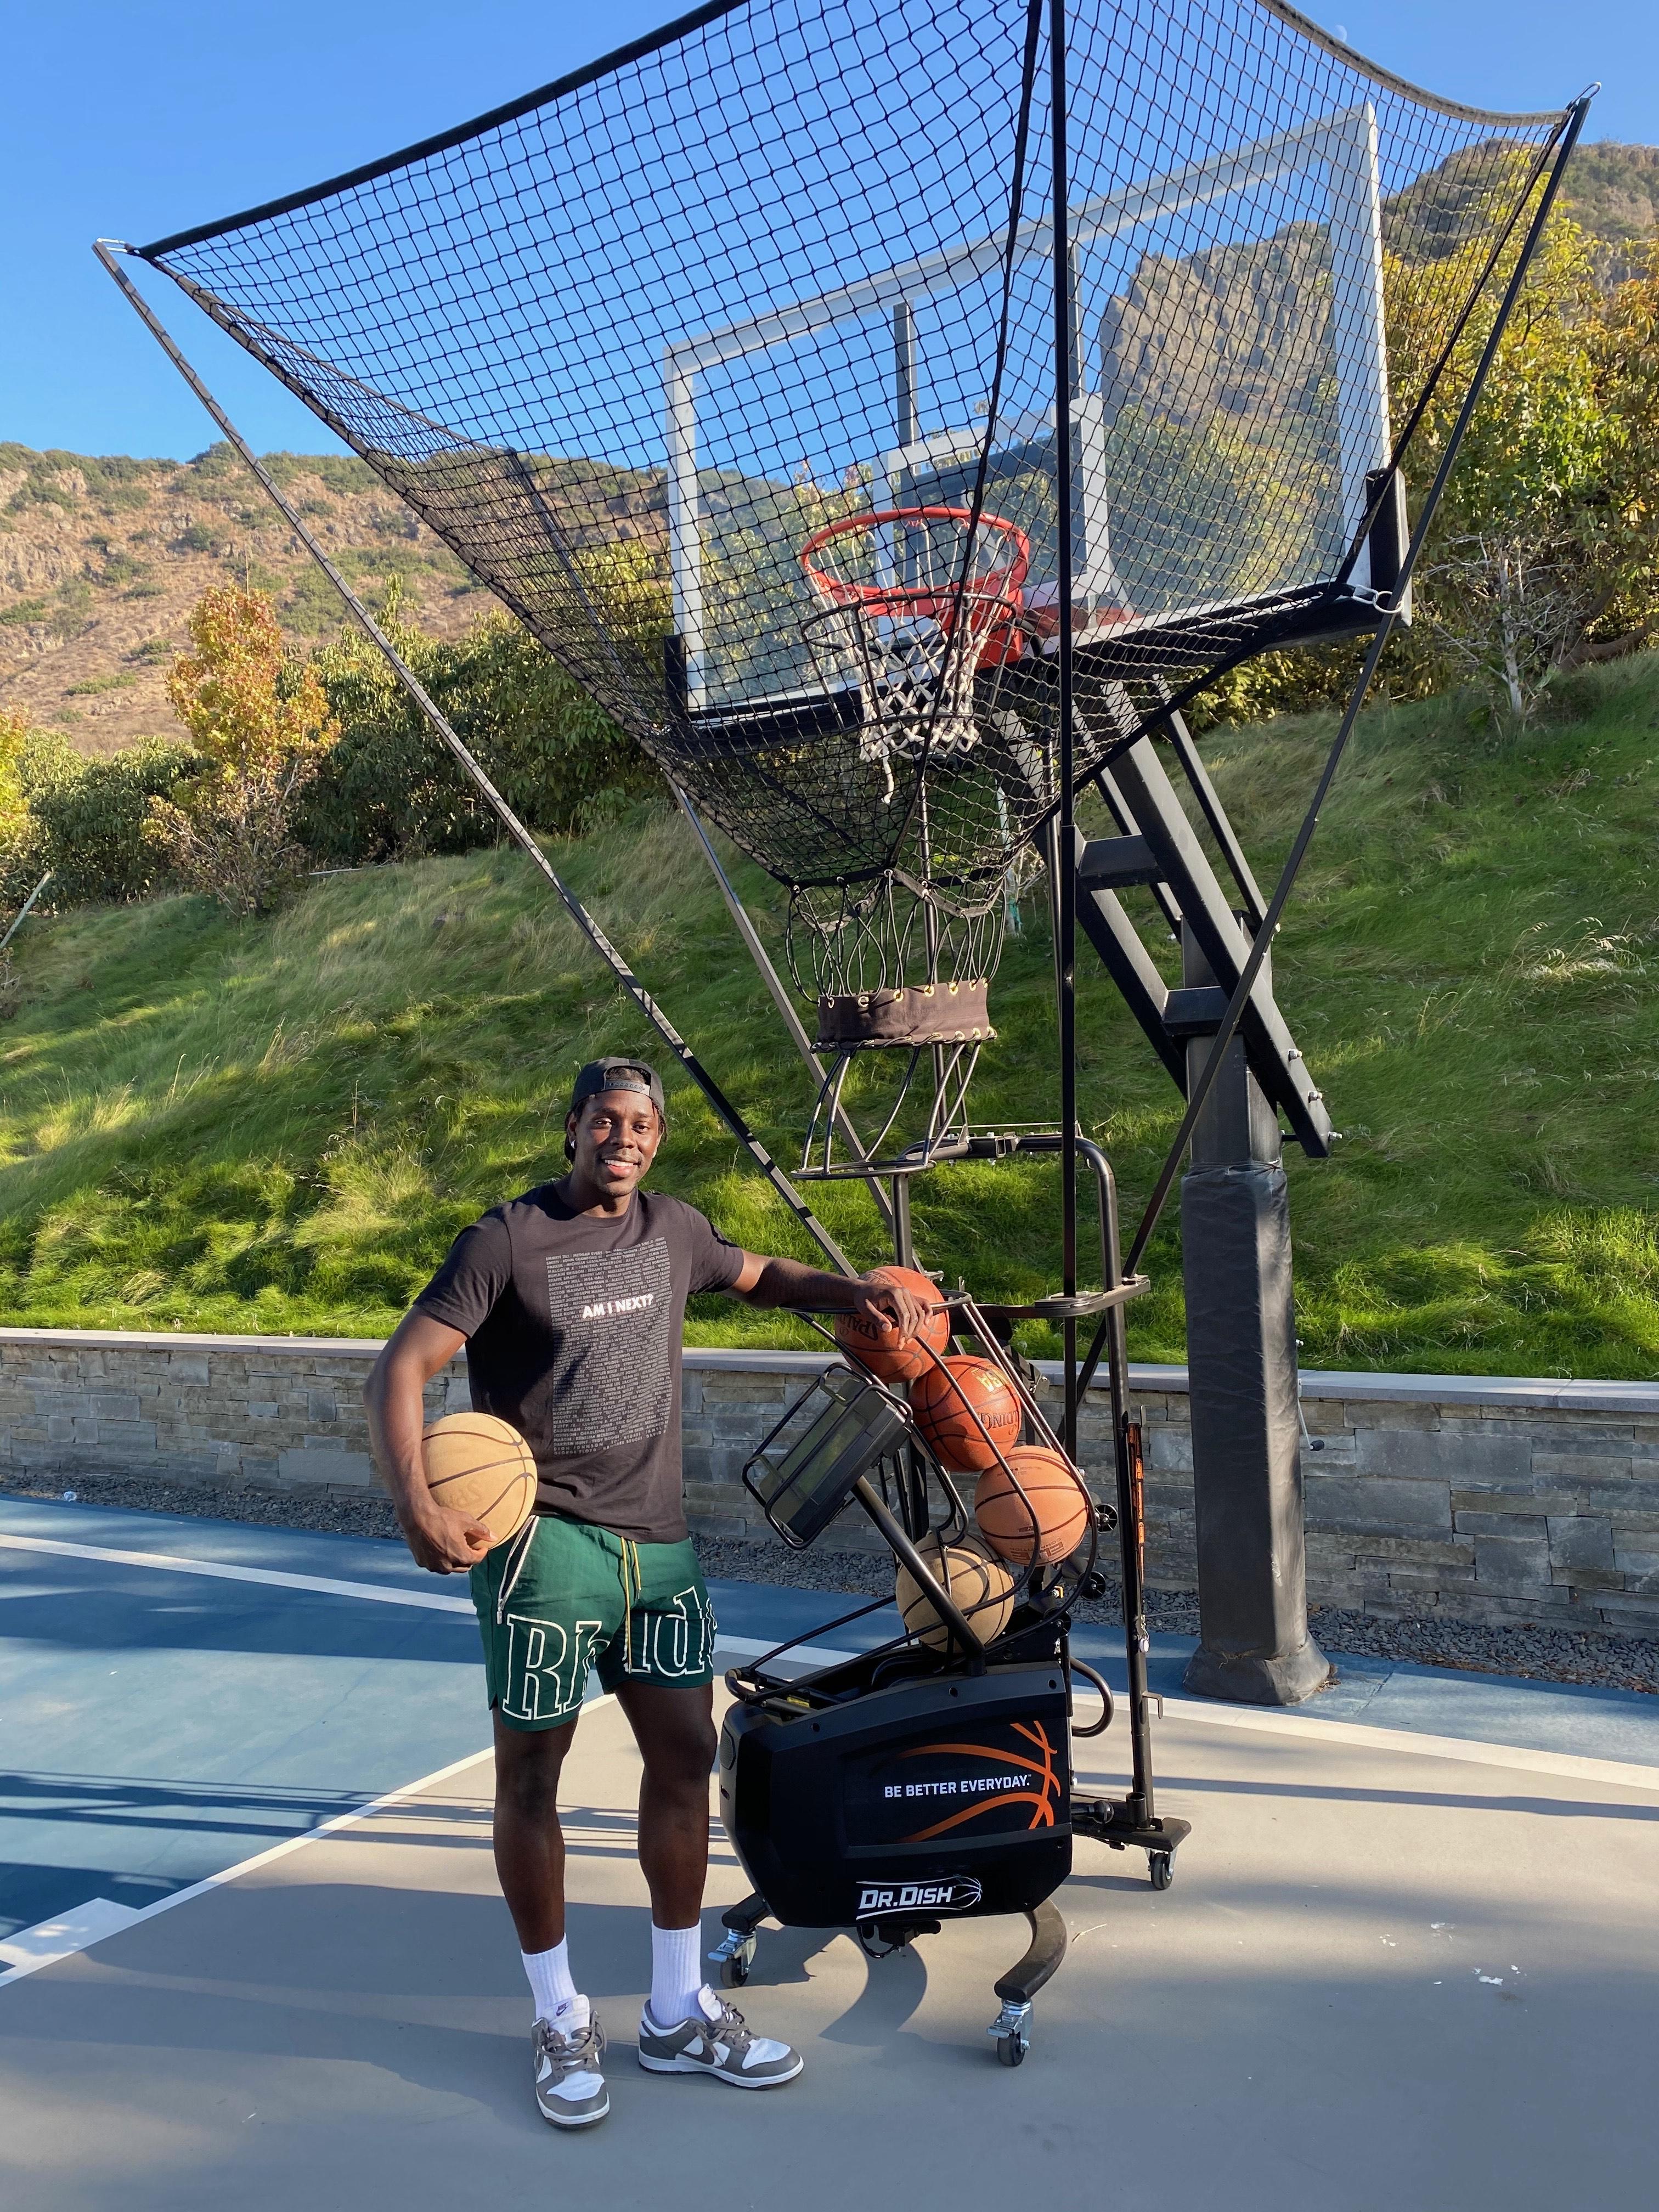 NBA All-Star Jrue Holiday Joins the Dr. Dish Family